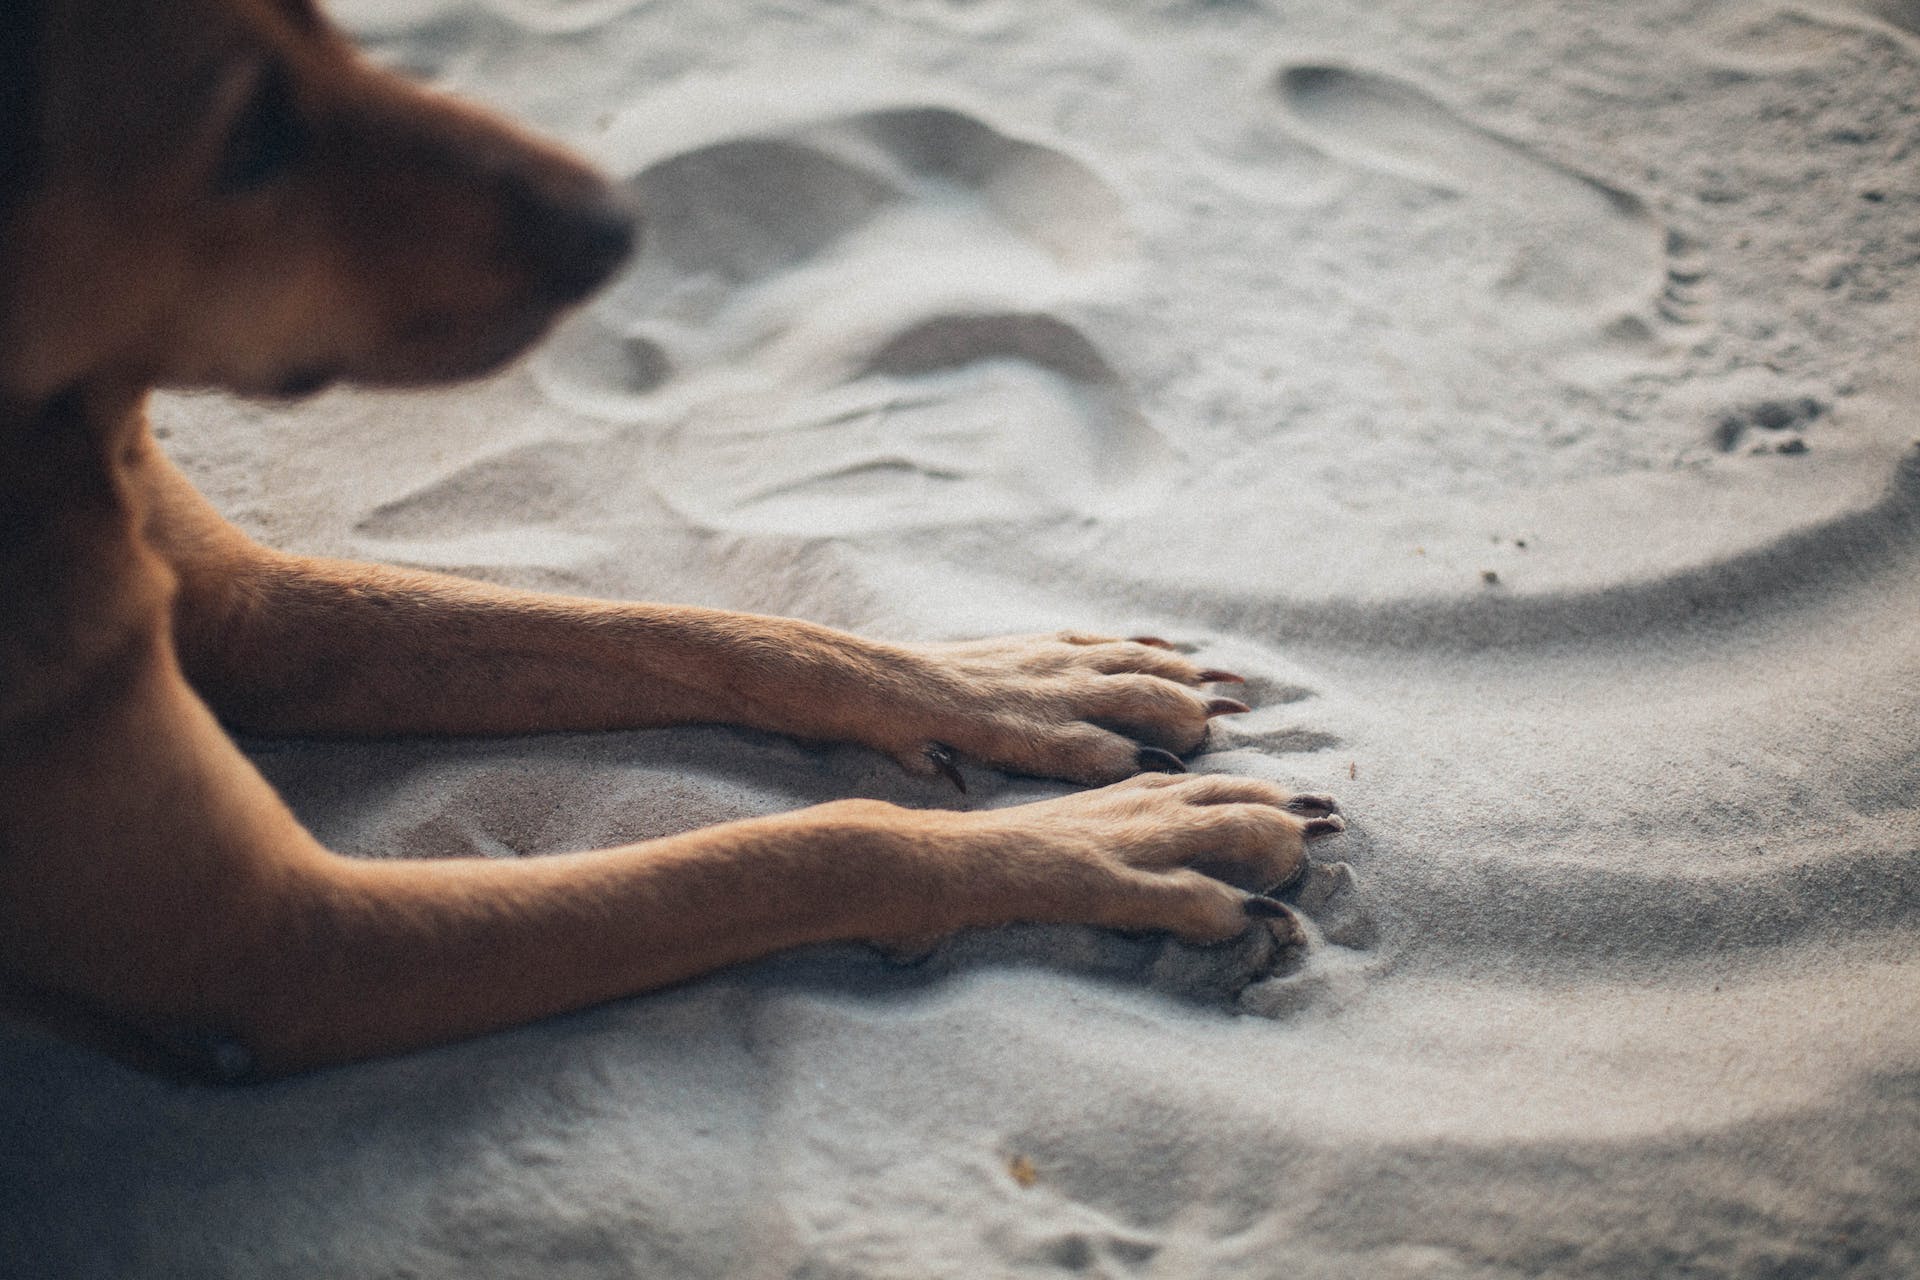 A dog resting their paws in sand